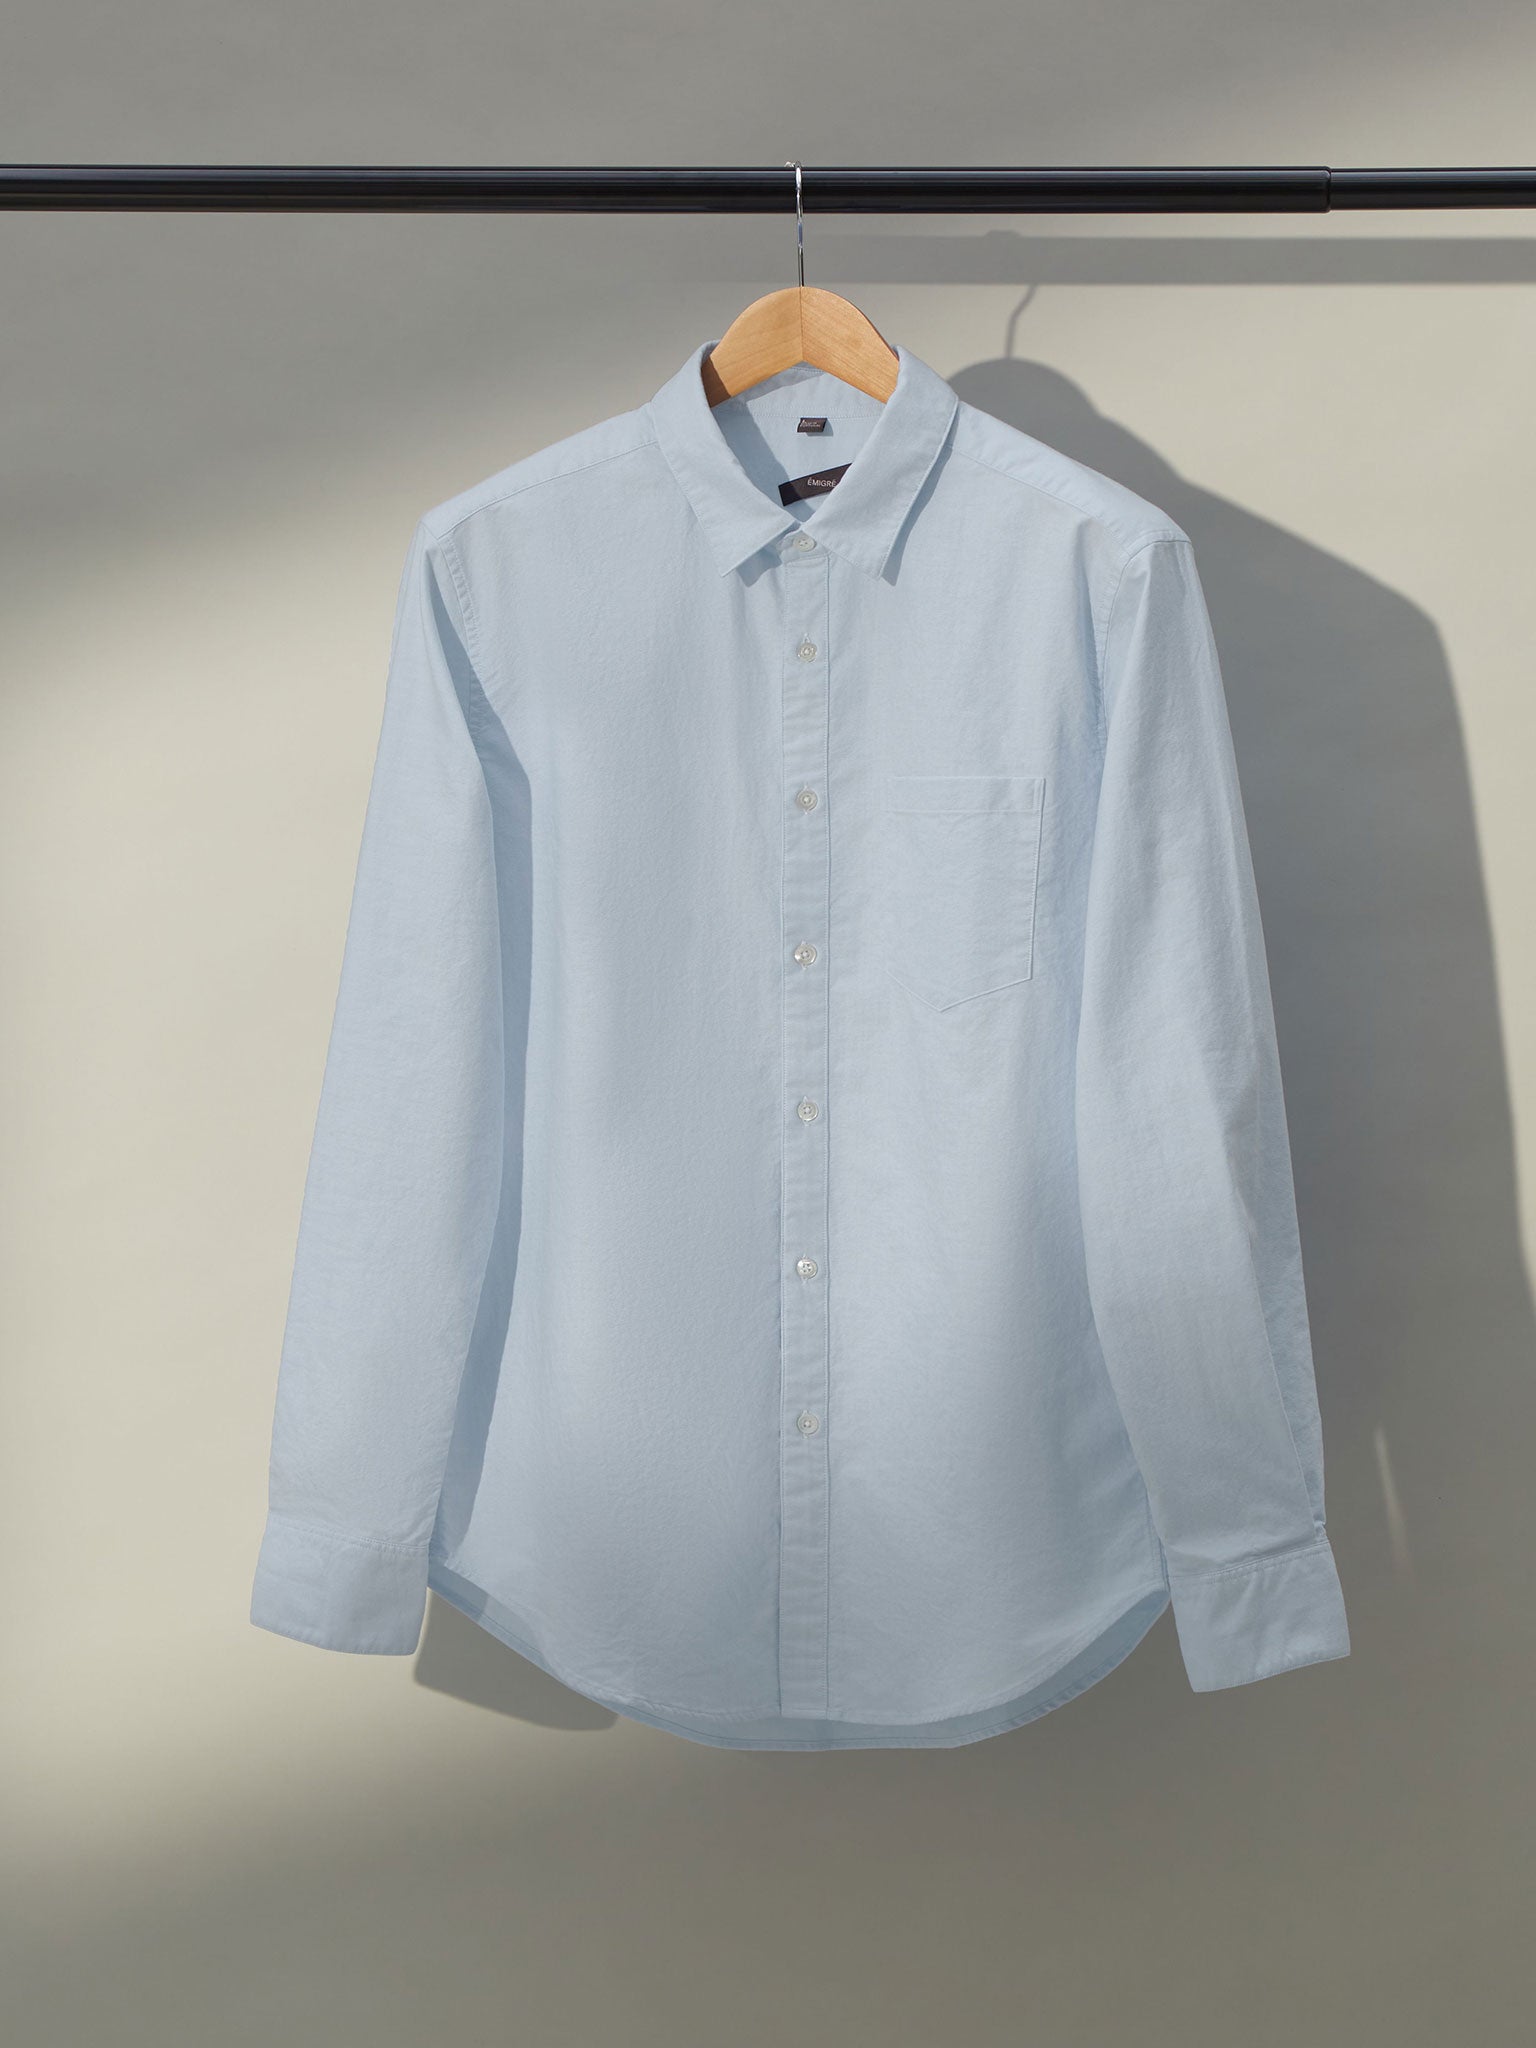 Classic men's blue oxford shirt with button-down collar and chest pocket